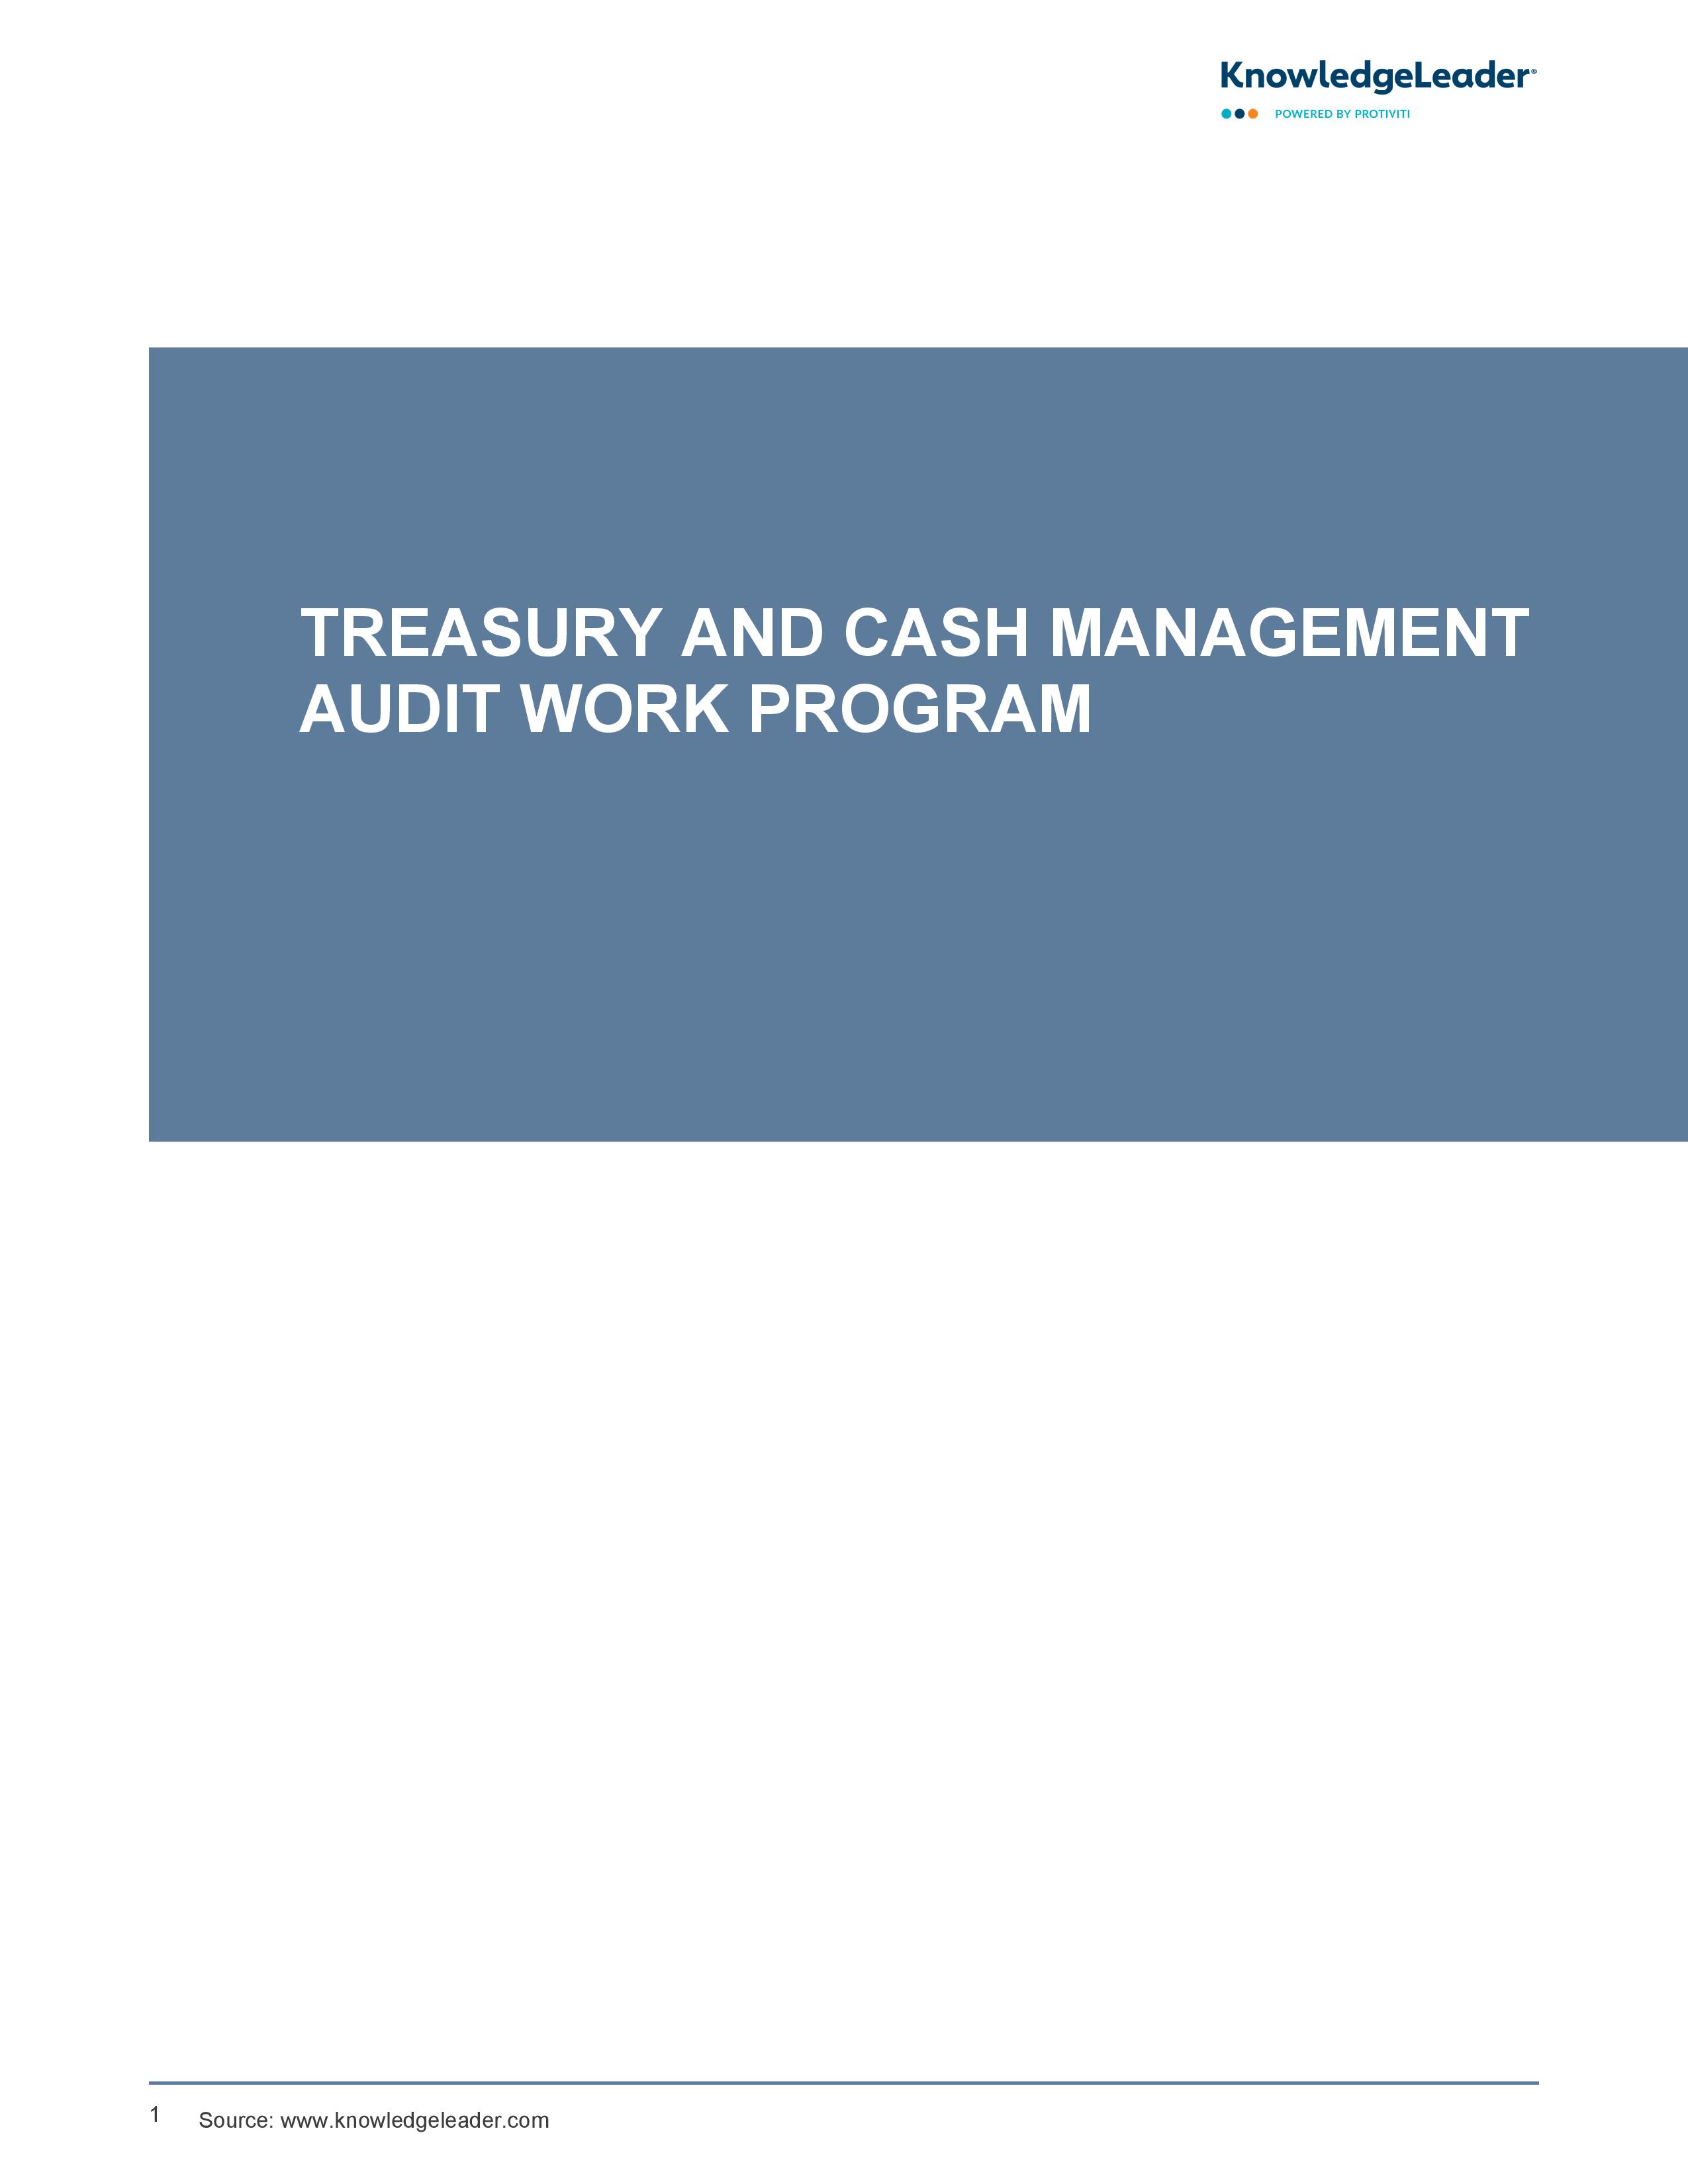 screenshot of the first page of Treasury and Cash Management Audit Work Program